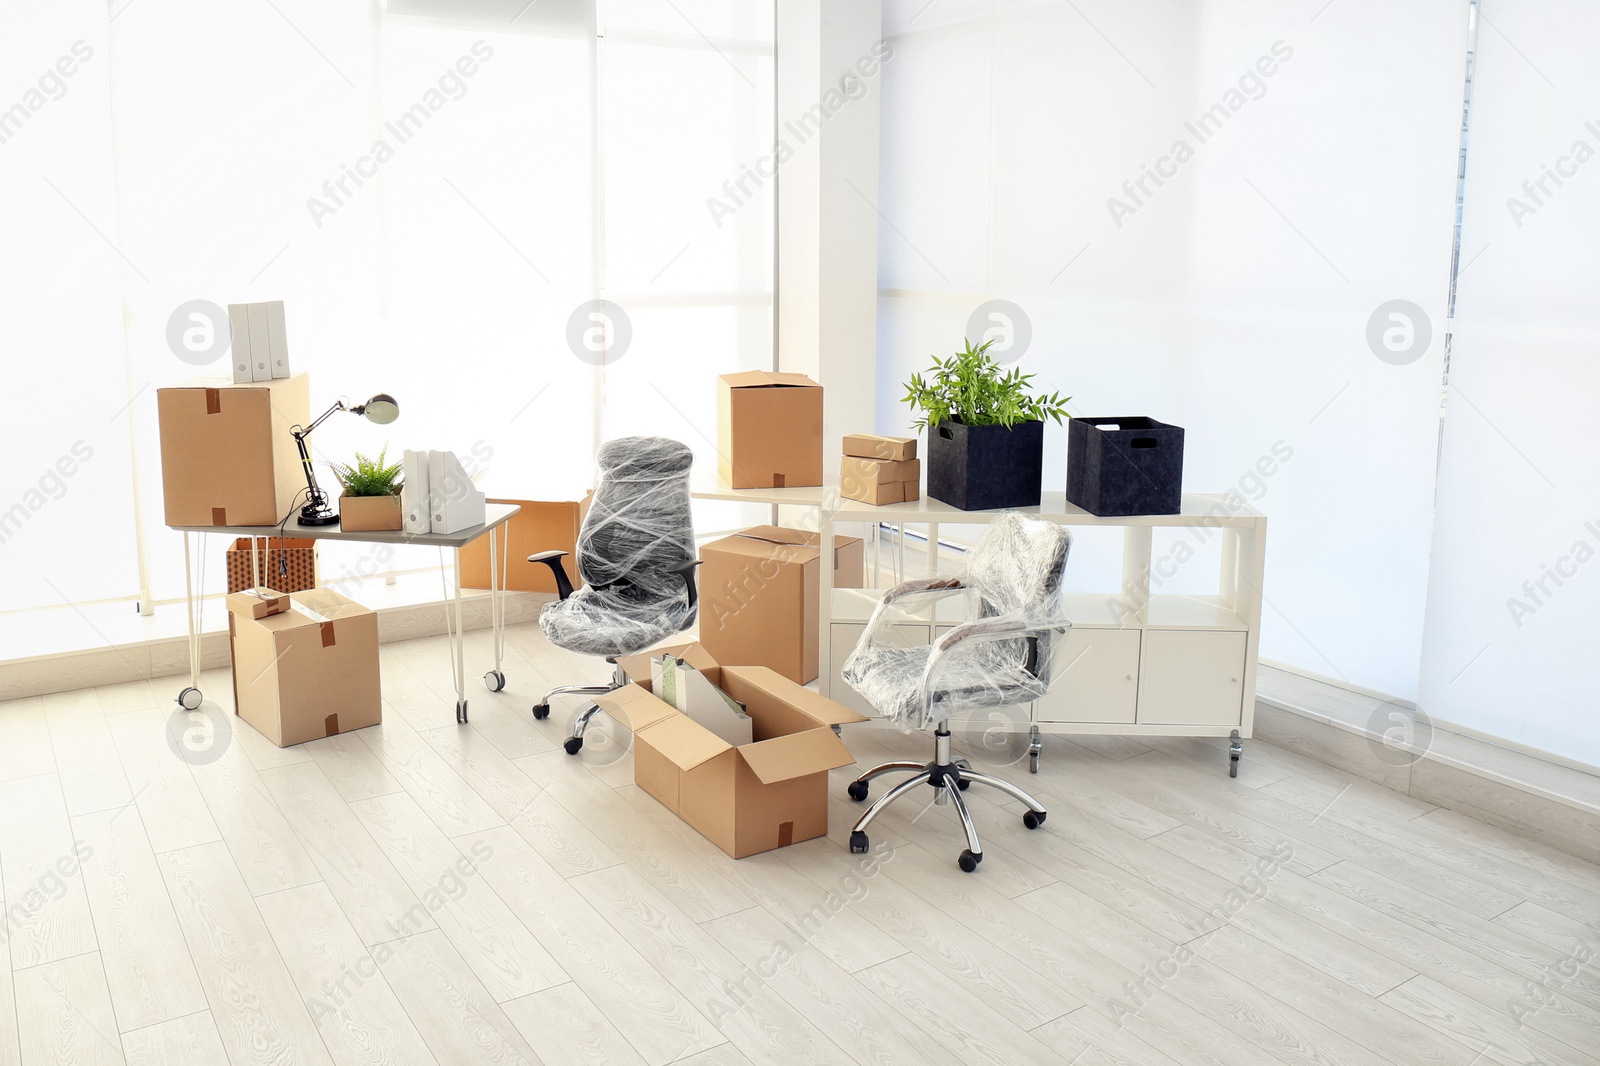 Photo of Moving boxes and furniture in new office